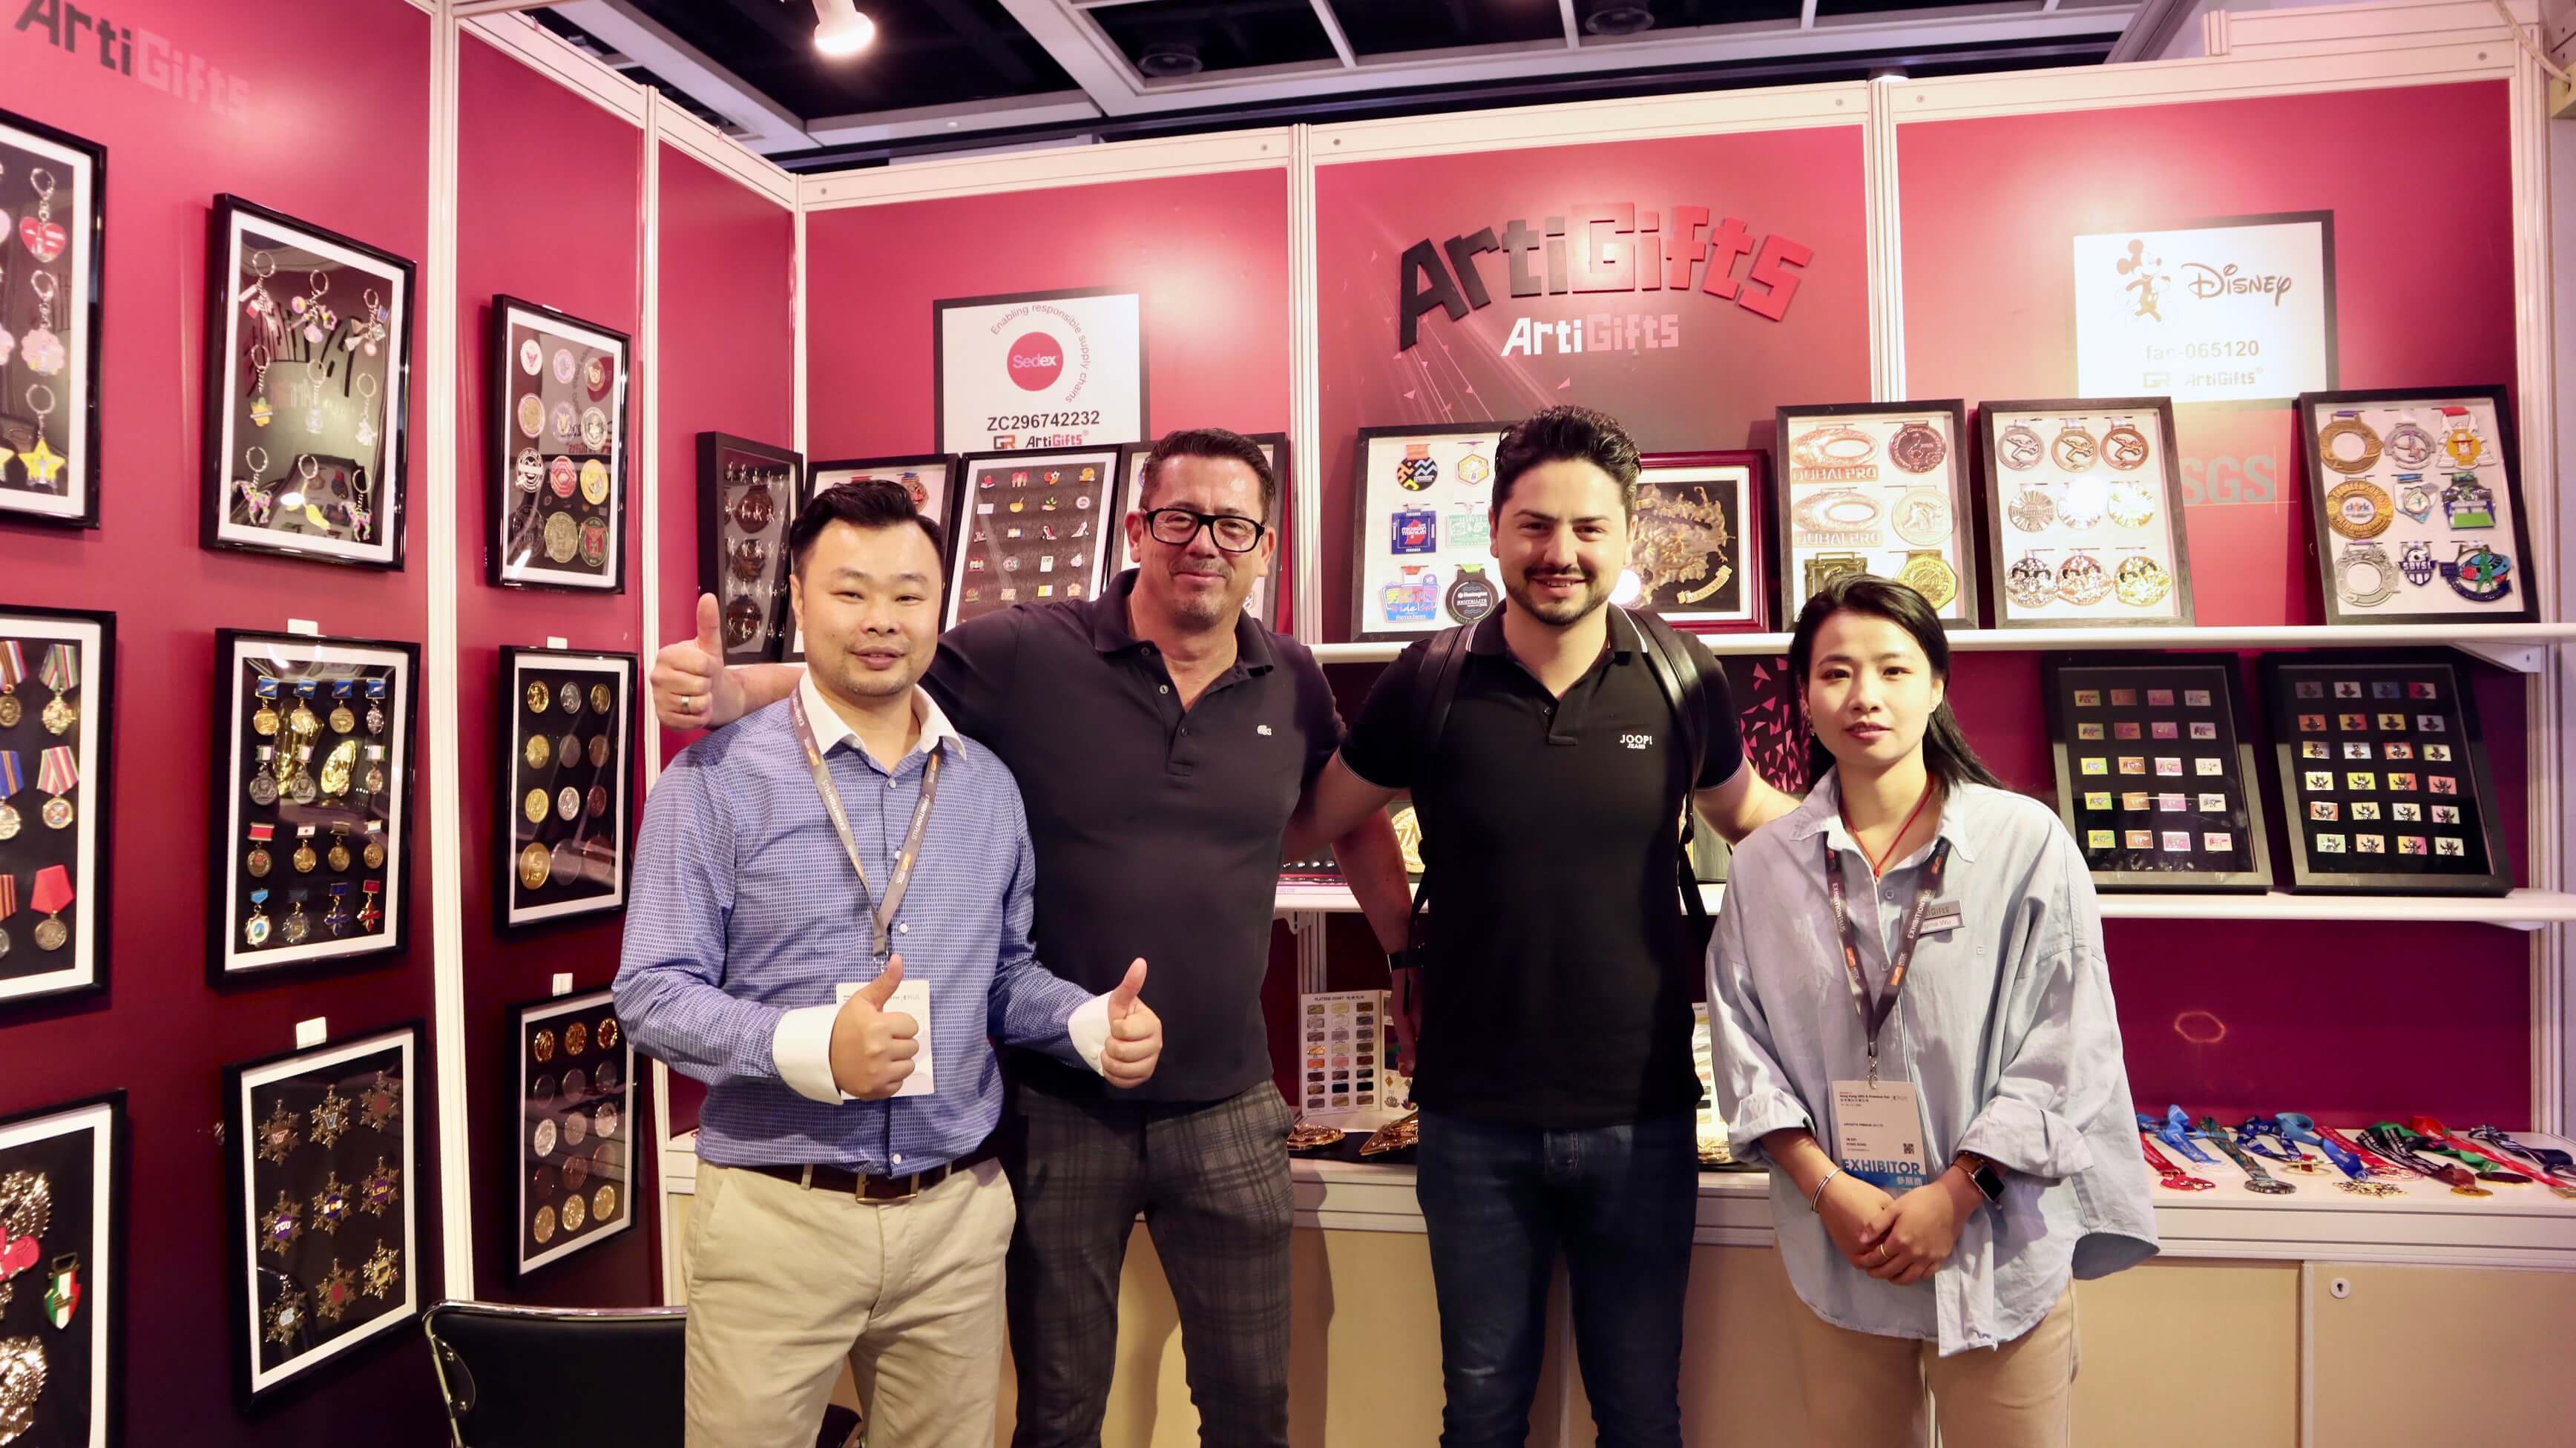 Thank You for Visiting Our Booth at the Hong Kong Gifts & Premium Fair